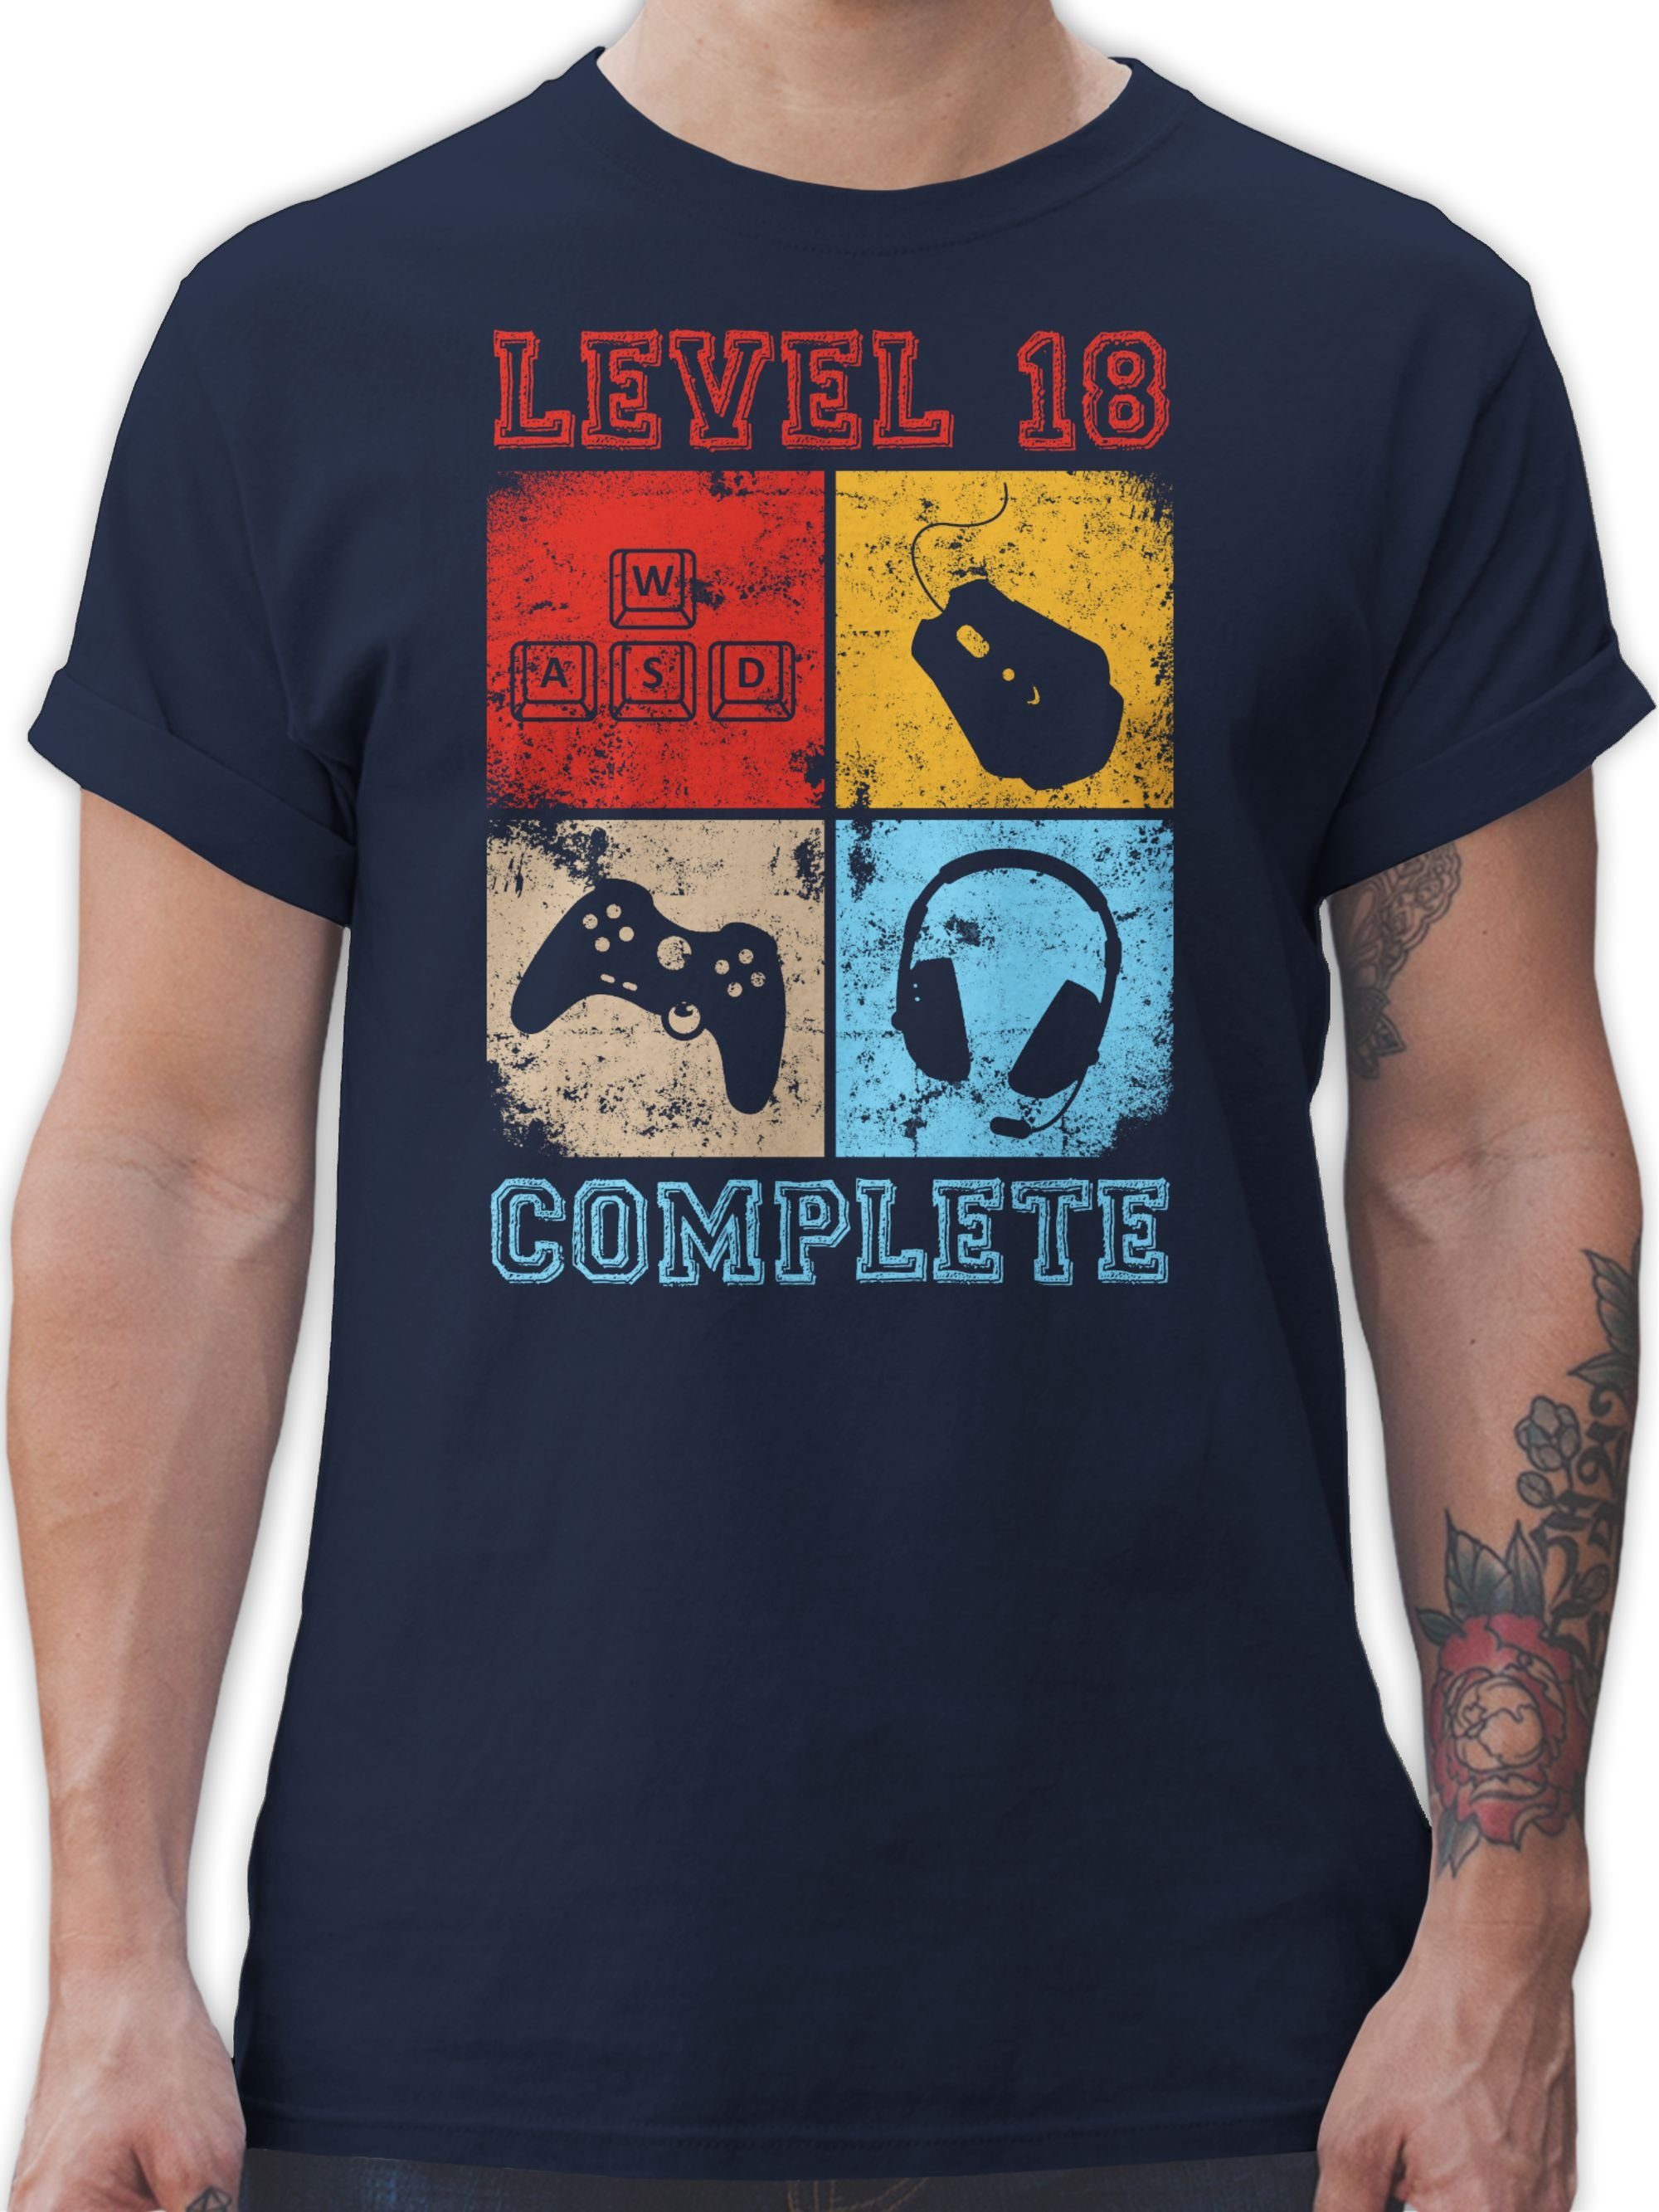 Complete Completed T-Shirt Blau Geburtstag Level Shirtracer 02 18. 18 Navy